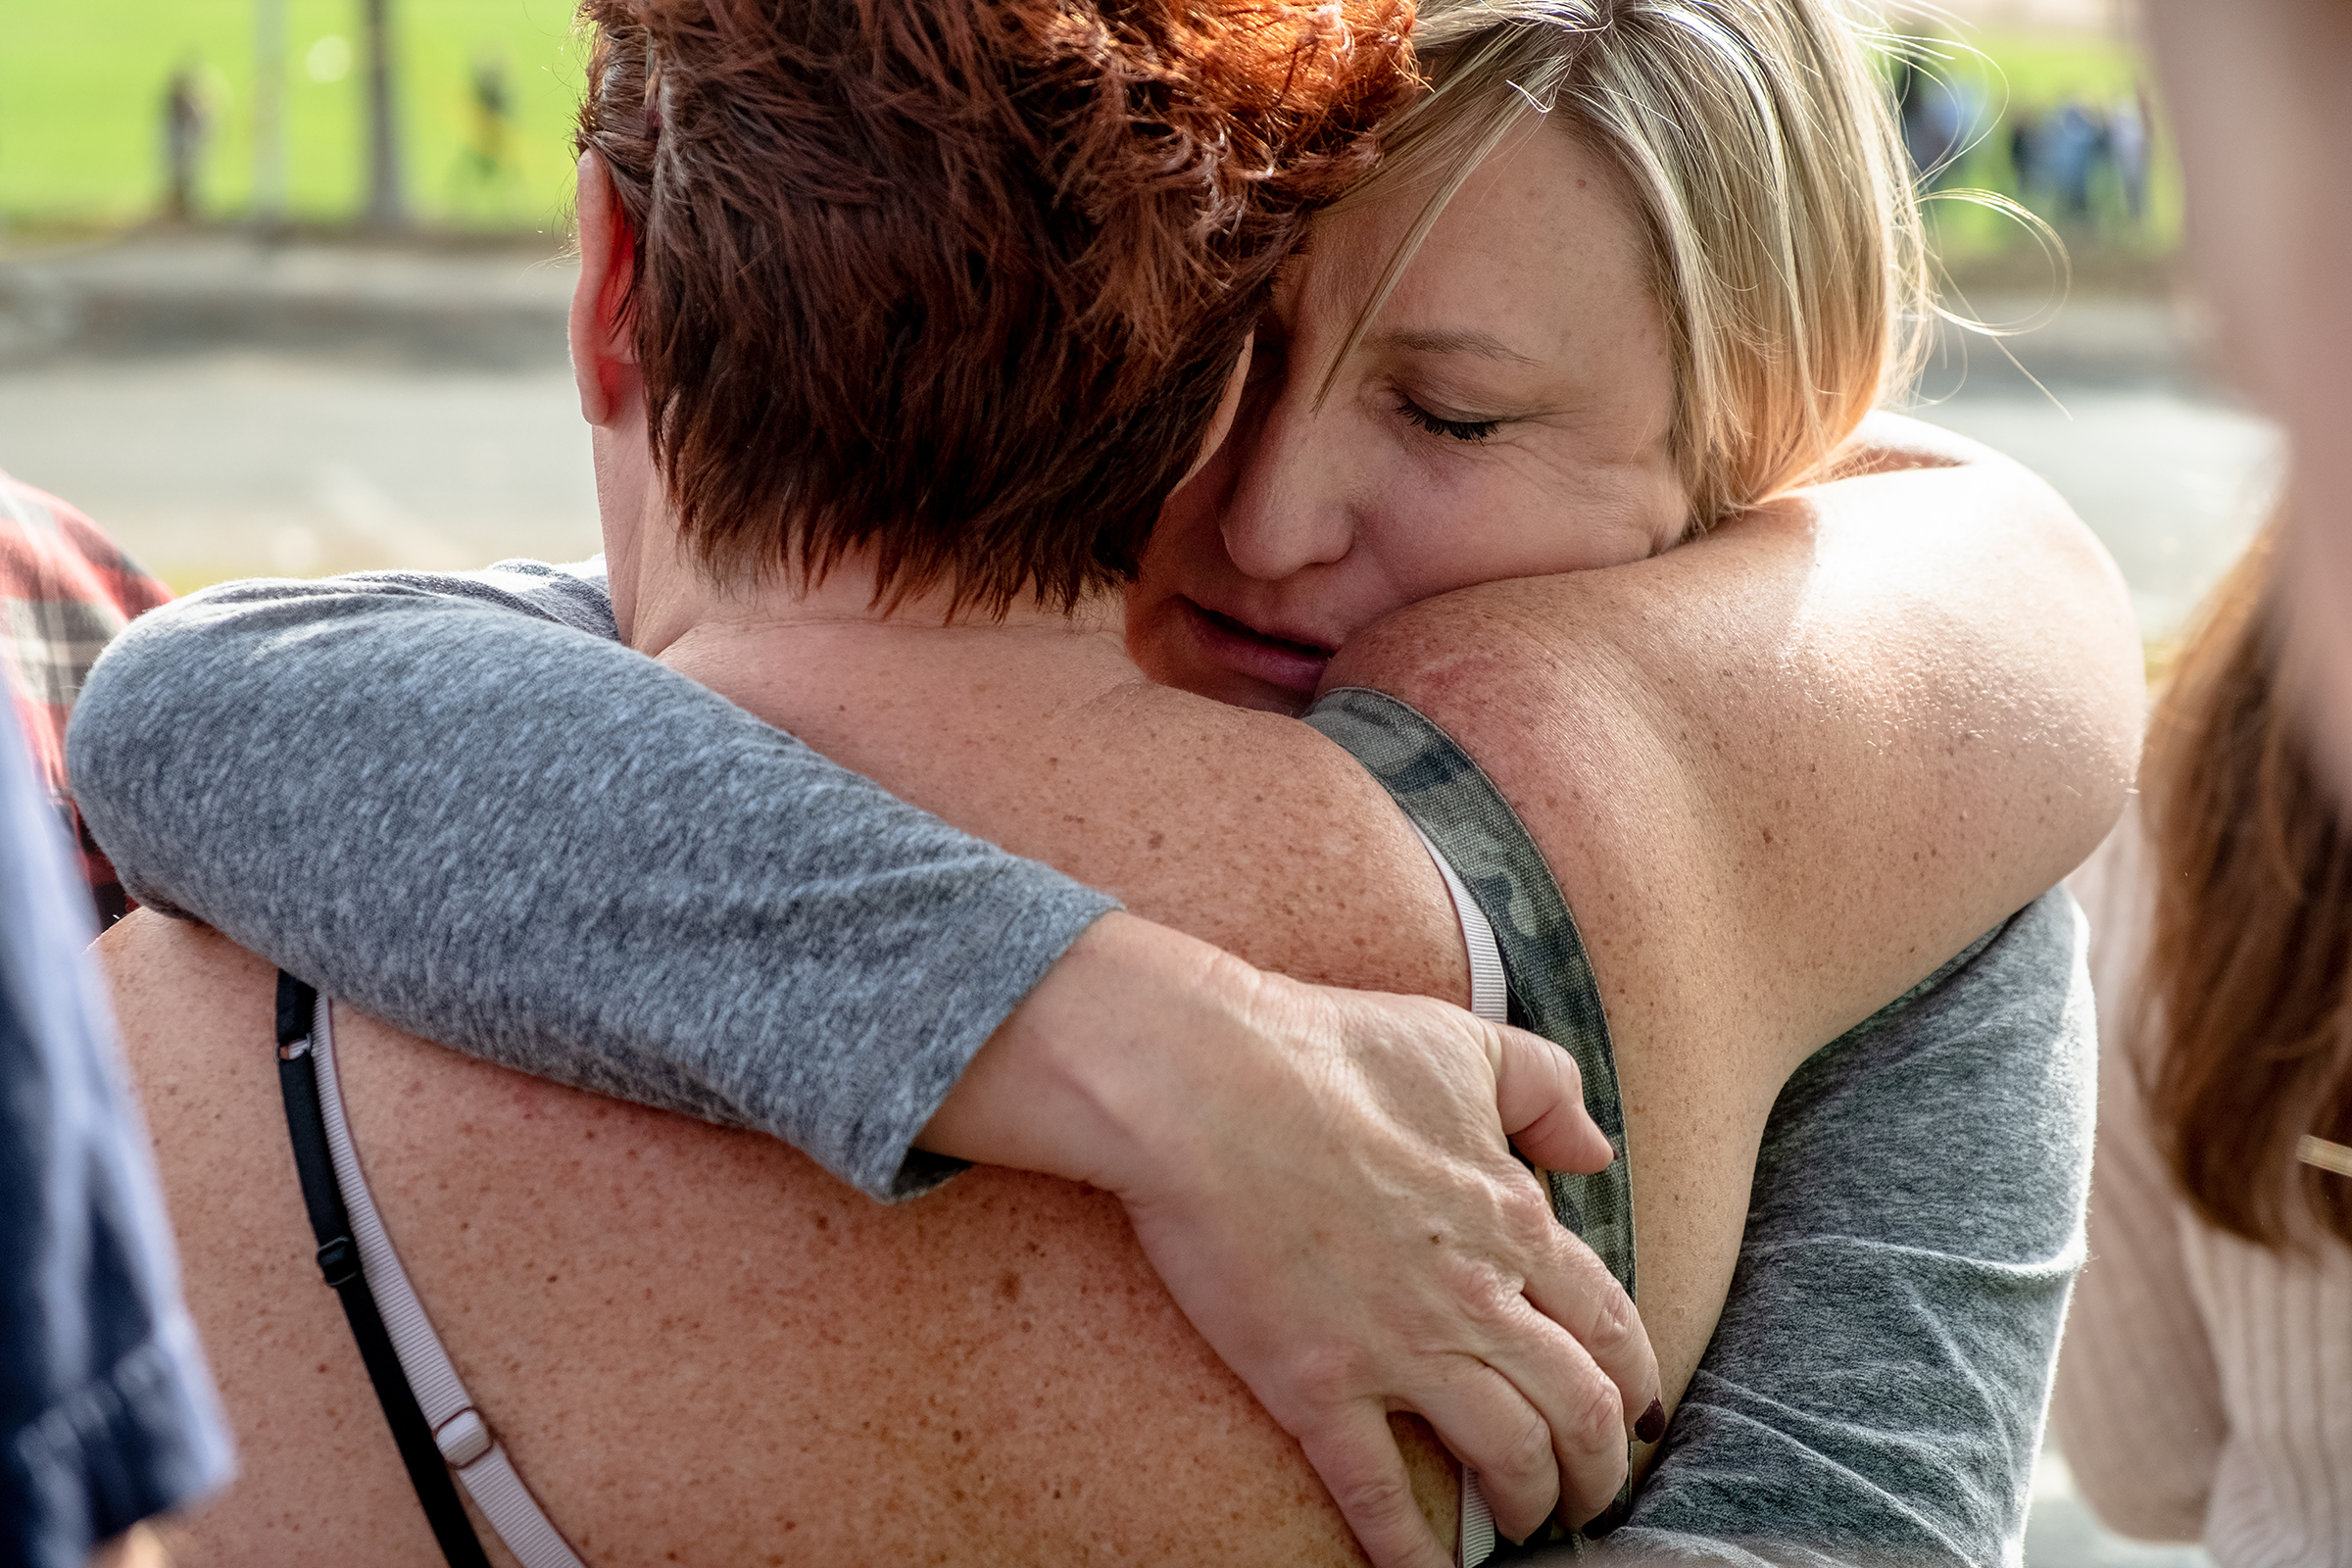 Christine Heffernan embraces her friend while waiting for her son, Alex Cox, 17, a student at Saugus High School, to arrive to the reunification center. (Hilary Swift)